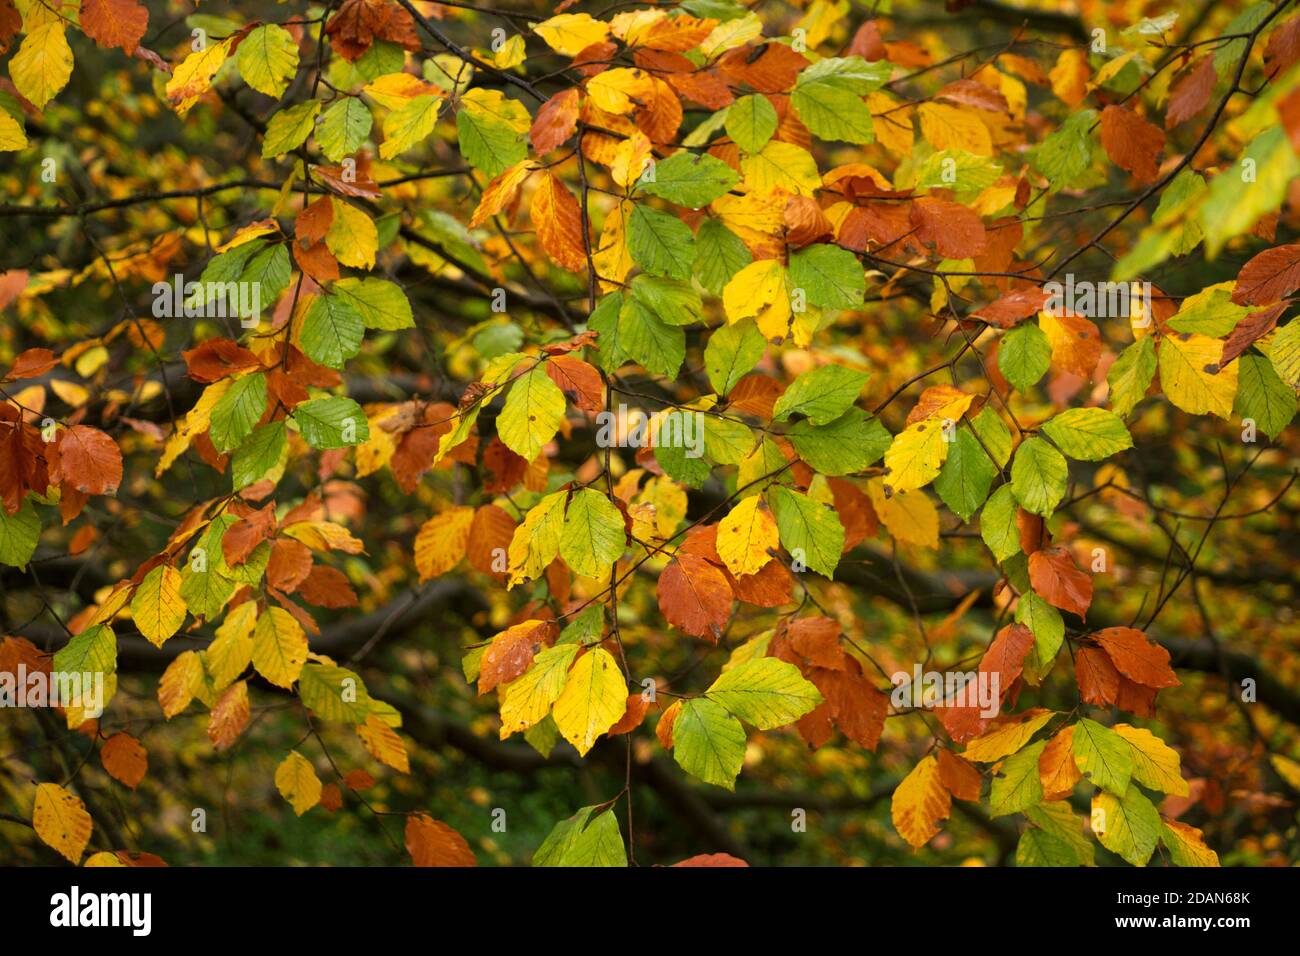 In autumn deciduous trees like this Beech start to withdraw nutrients and chlorophyll from the leaves to store for next seasons growth. Stock Photo